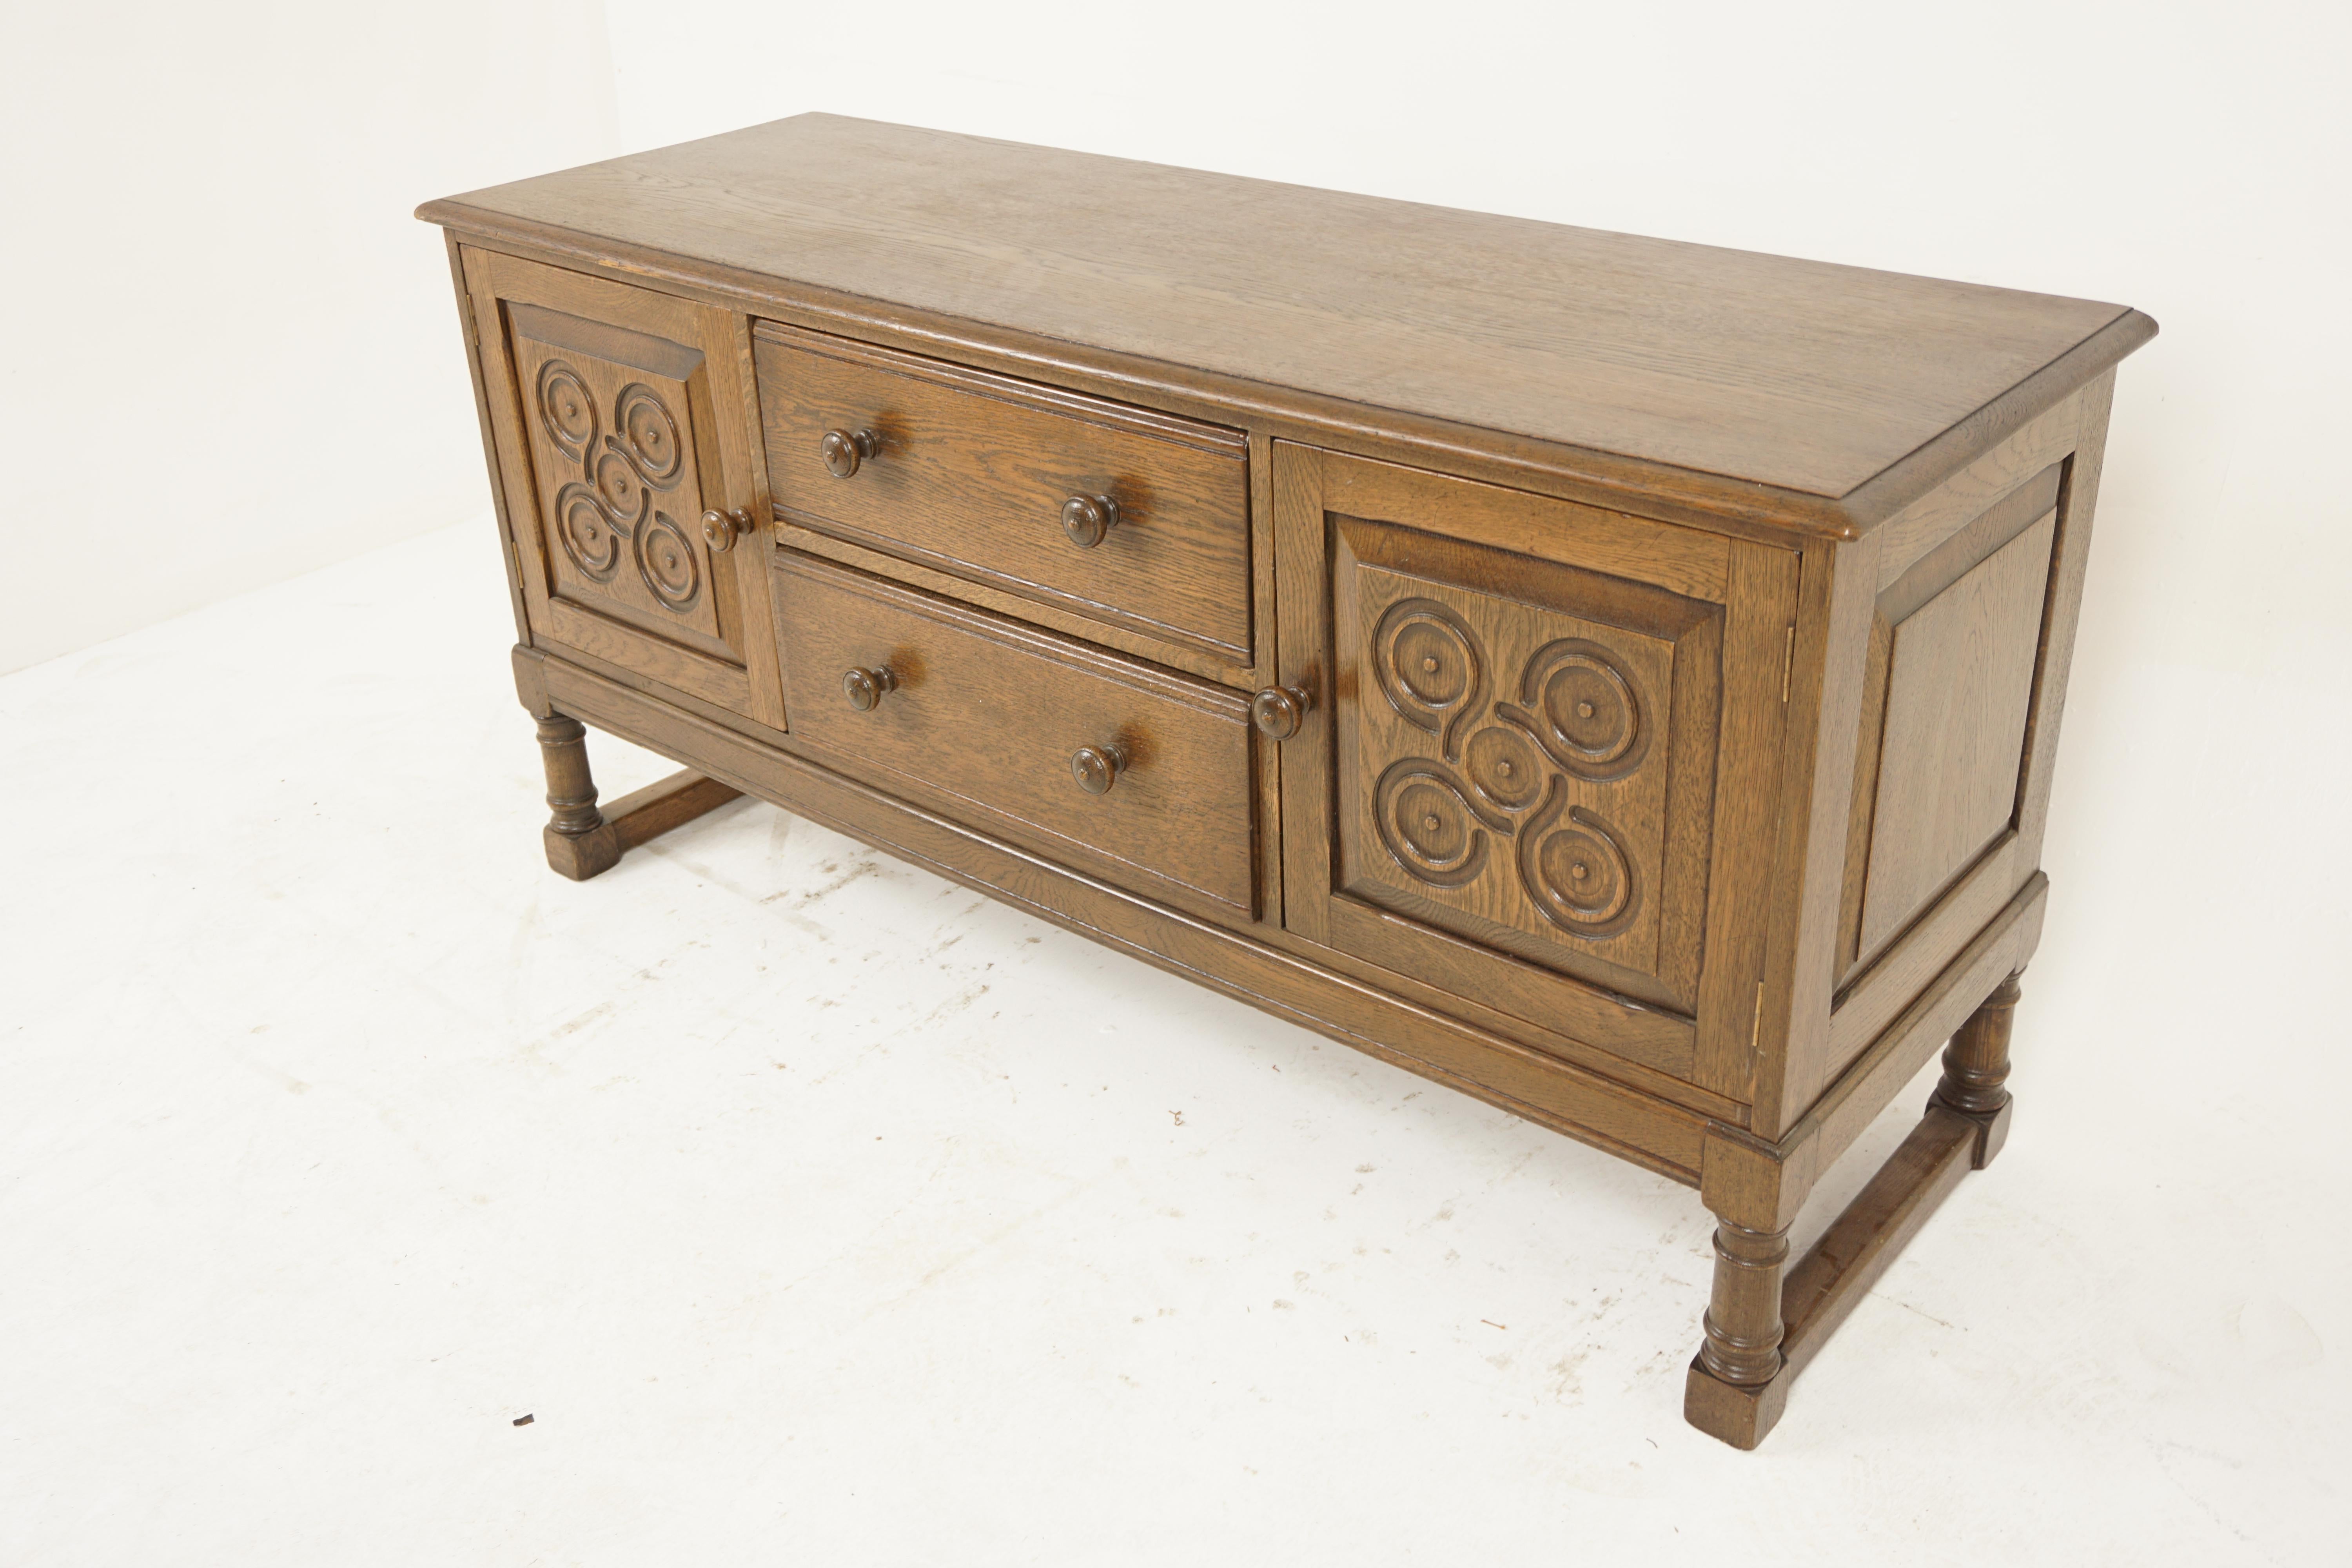 Vintage Solid Oak Sideboard, Dresser, Buffet, Scotland 1930, H1157

Solid oak
Original finish
Rectangular top with moulded edge
Pair of dovetailed drawers with original wooden knobs
Flanked by a pair of carved doors that open to reveal single shelf